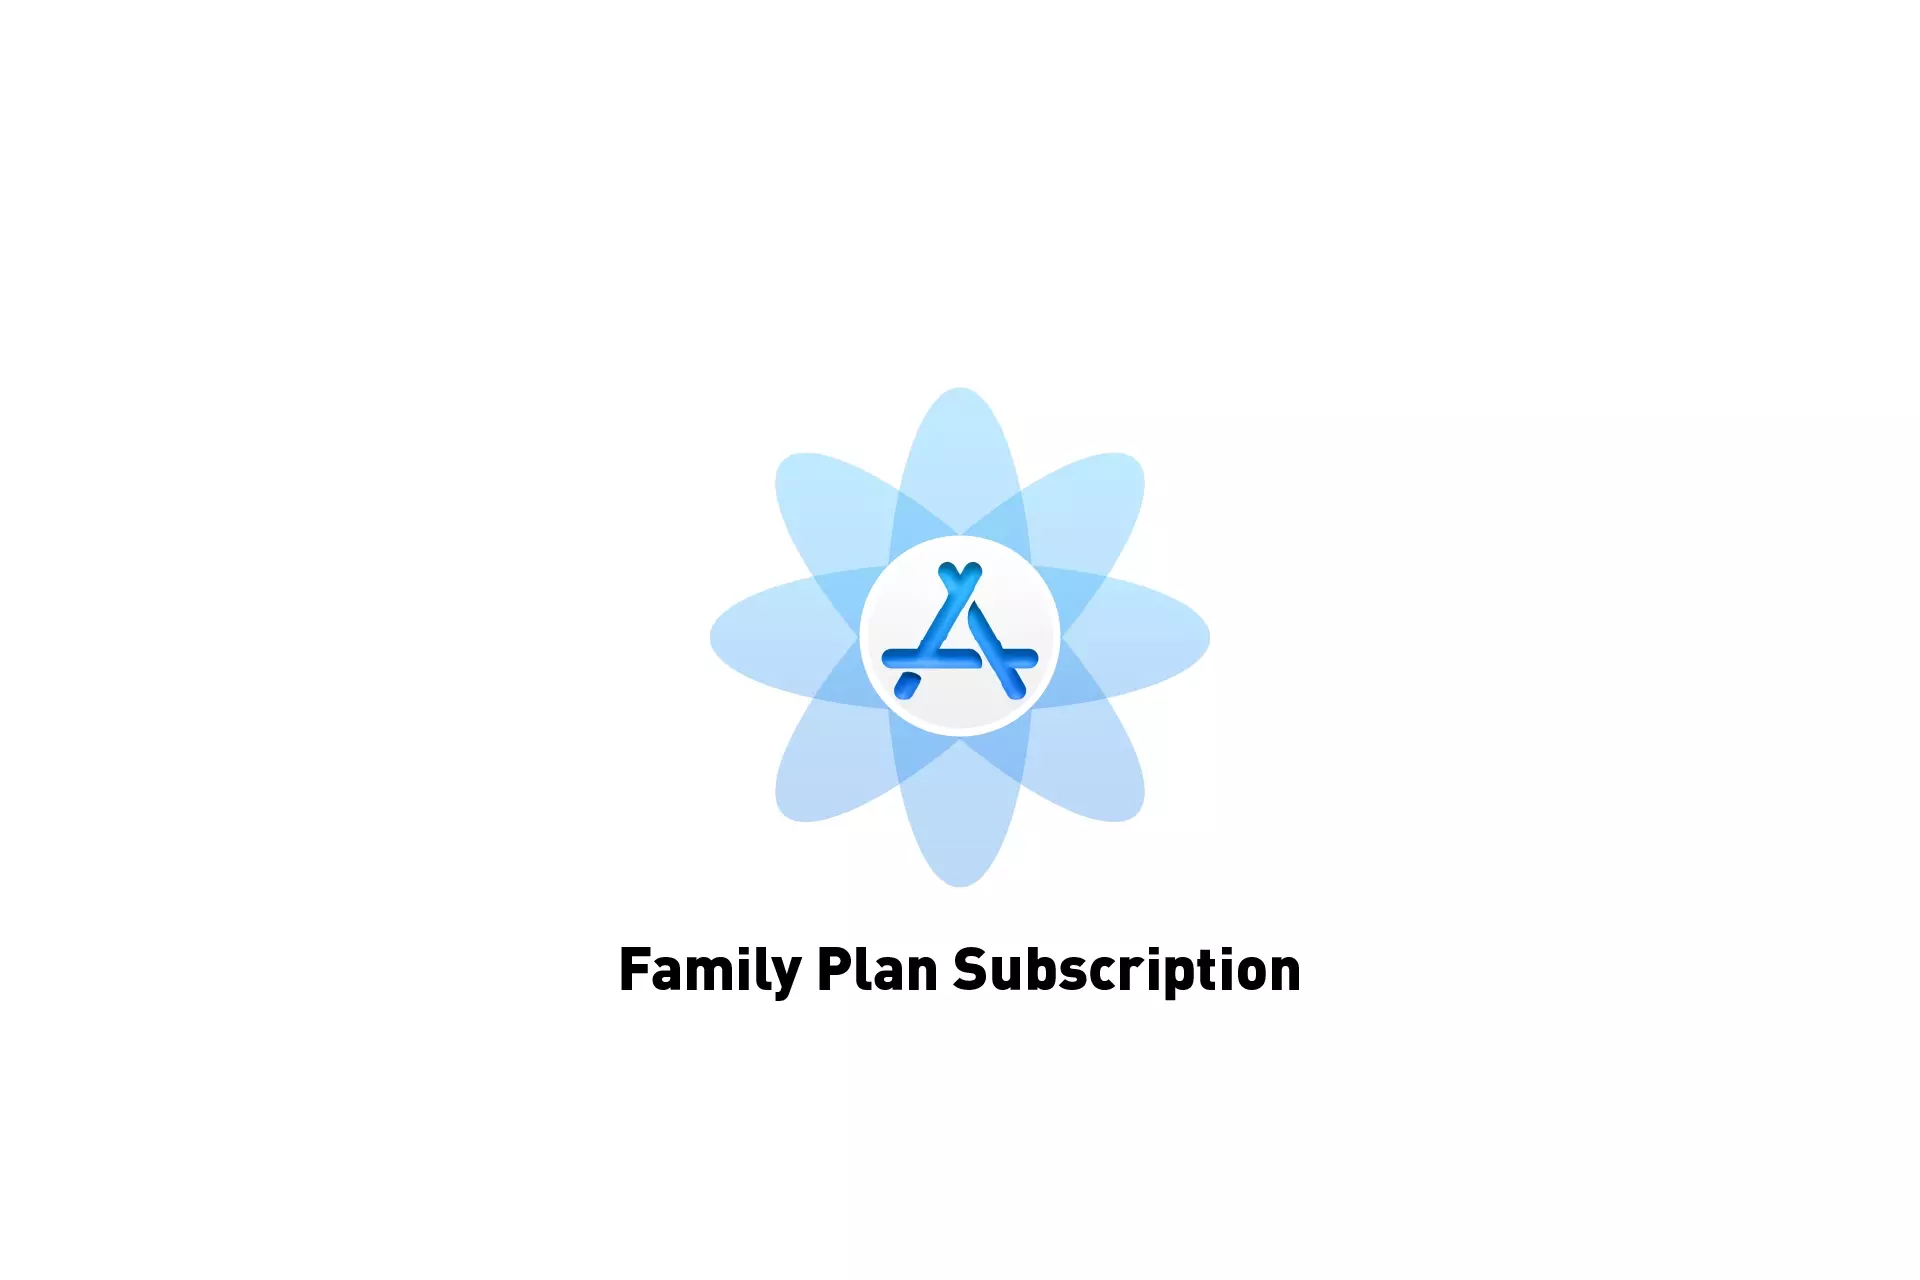 A flower that represents App Store Connect with the text "Family Plan Subscription" beneath it.